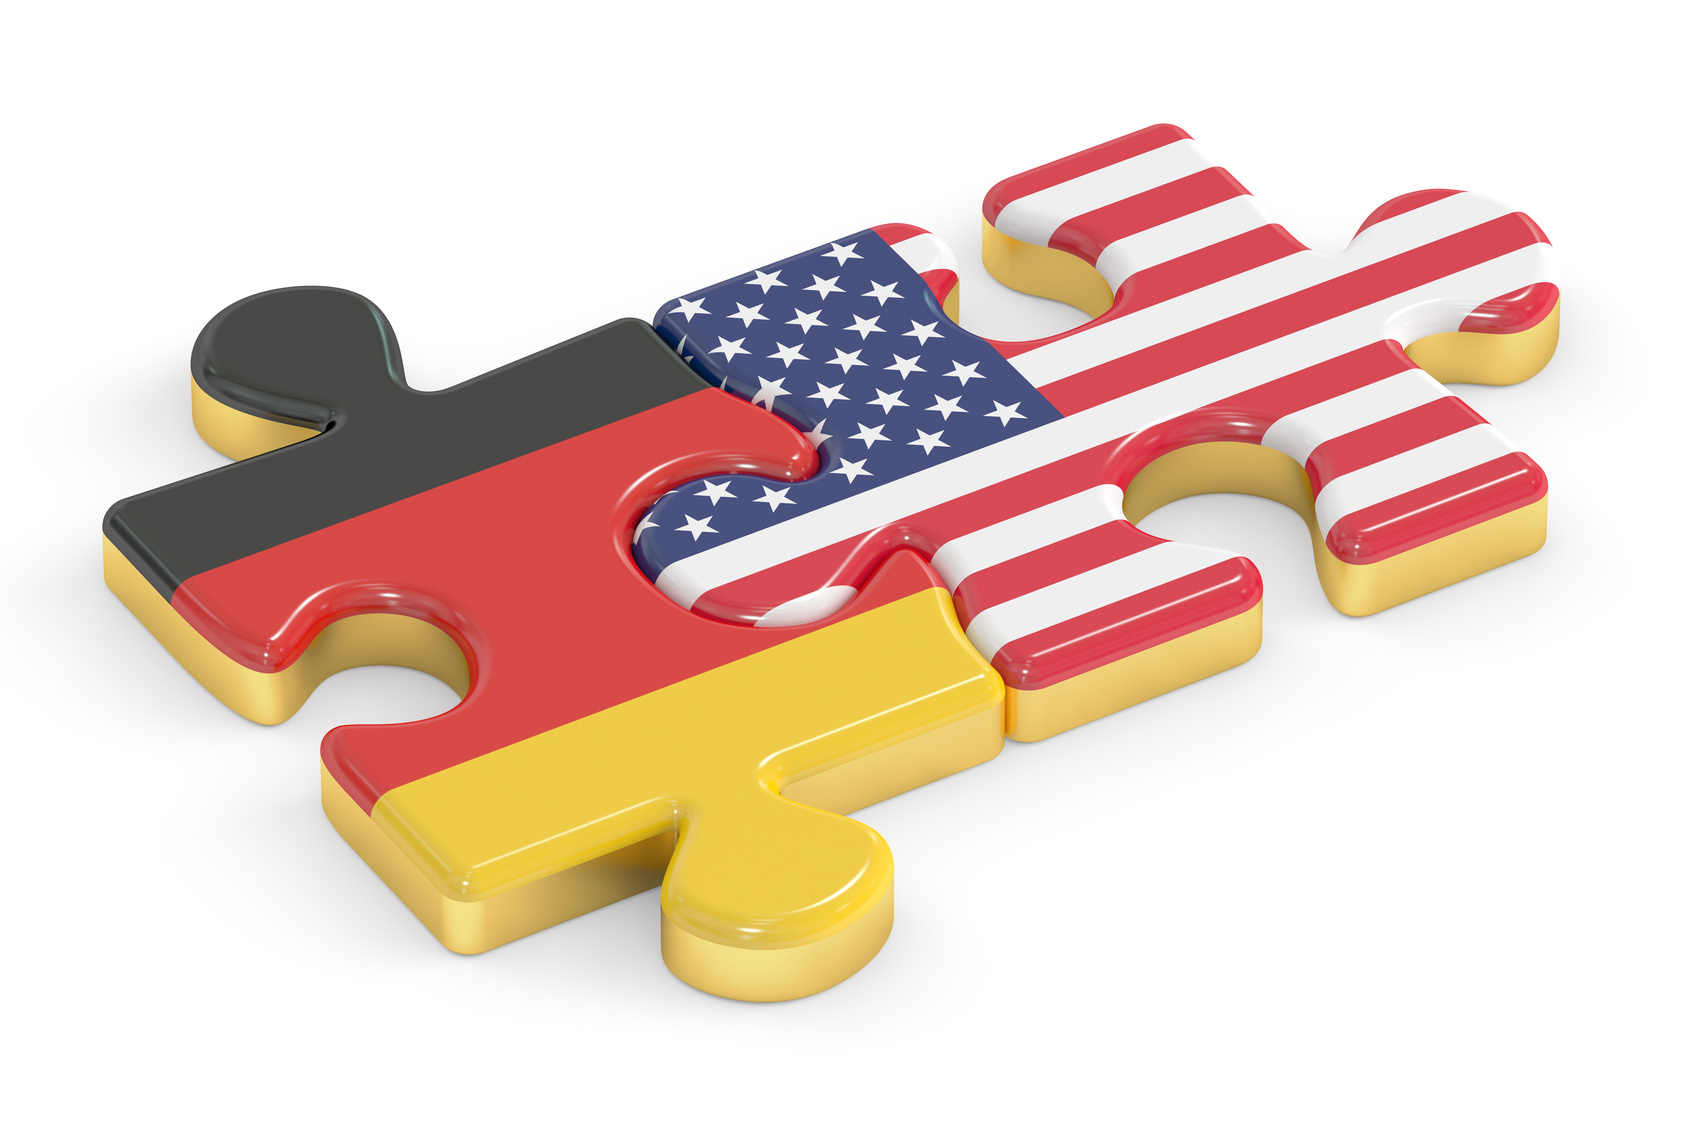 France and Germany puzzles from flags, relation concept. 3D rendering